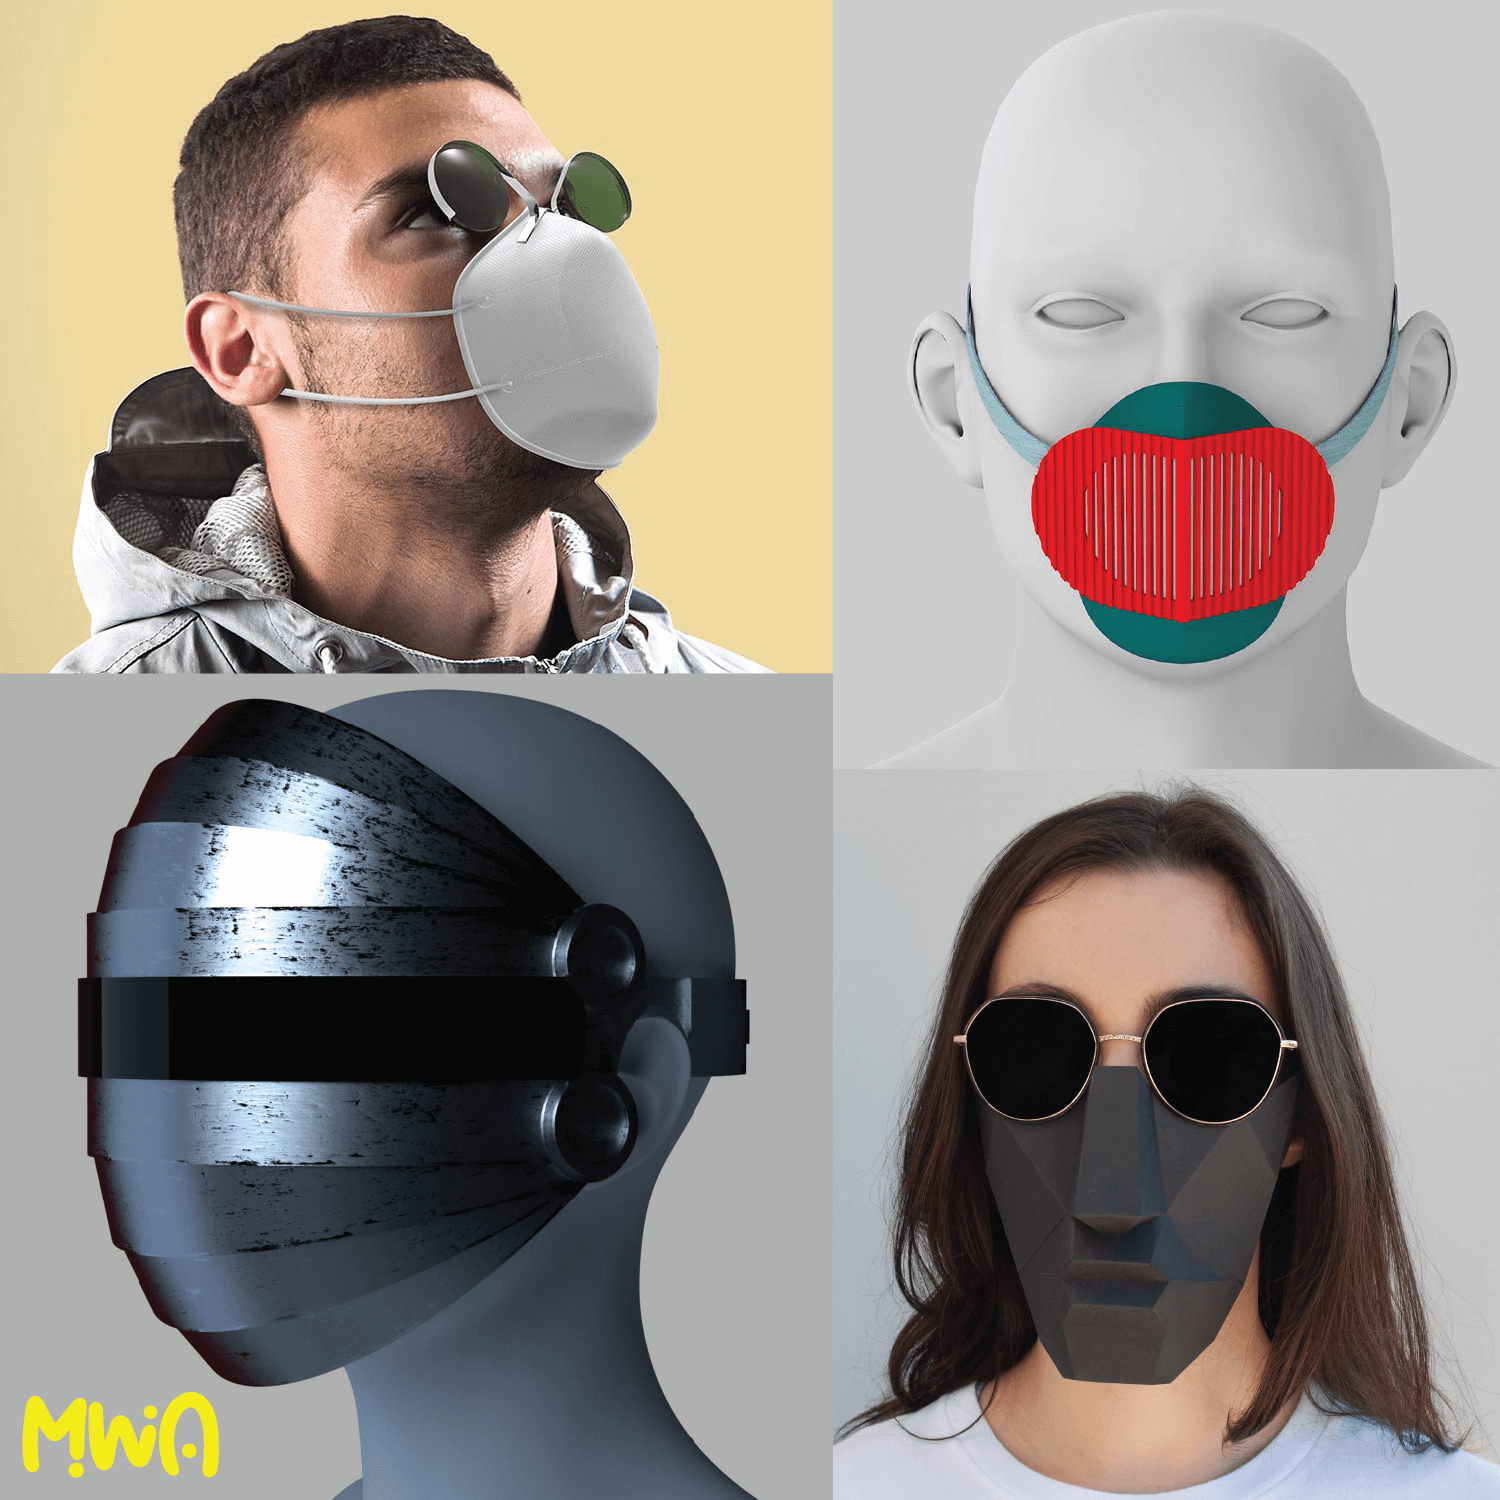 COVID-19: BYOM (Bring Your Own Mask)